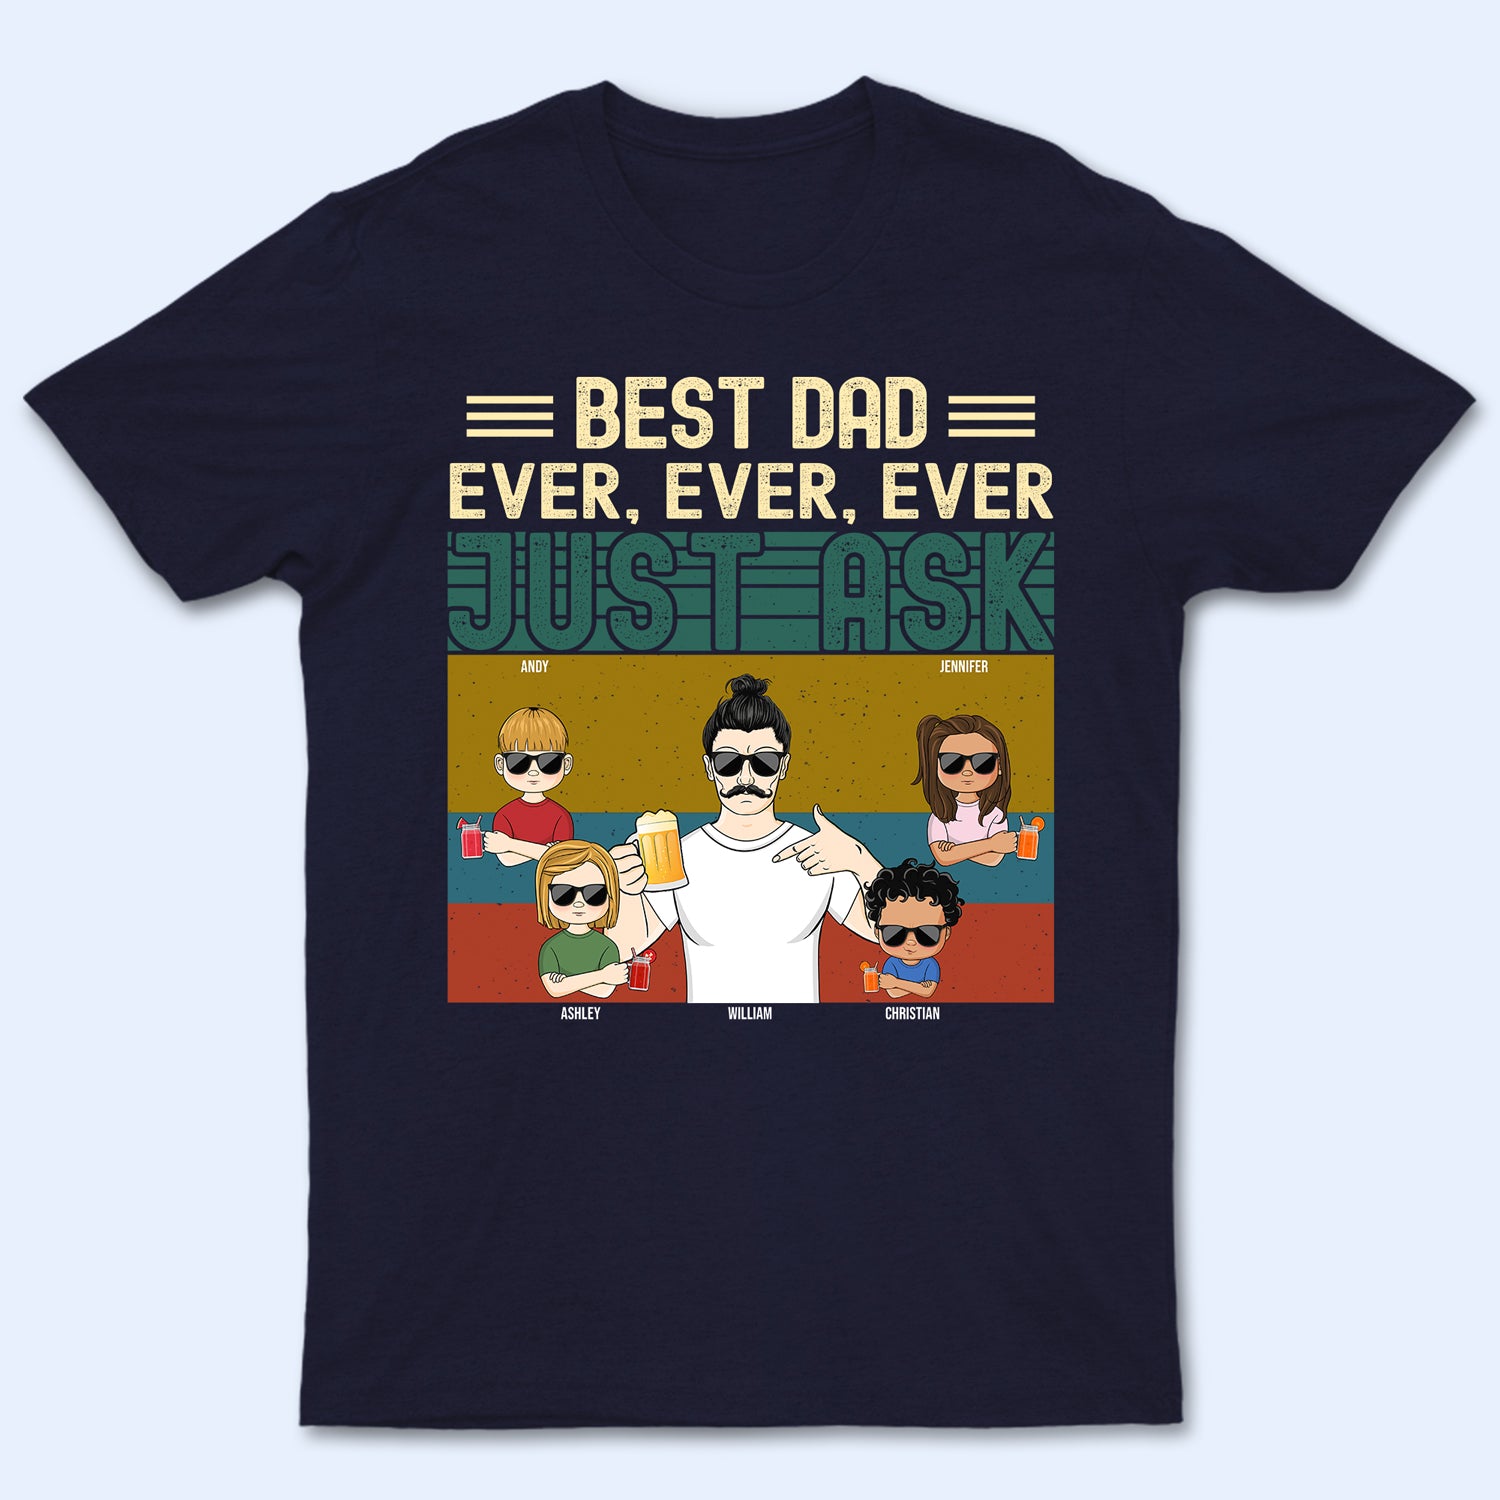 Best Dad Ever Ever Ever - Gift For Father, Dad - Personalized Custom T Shirt